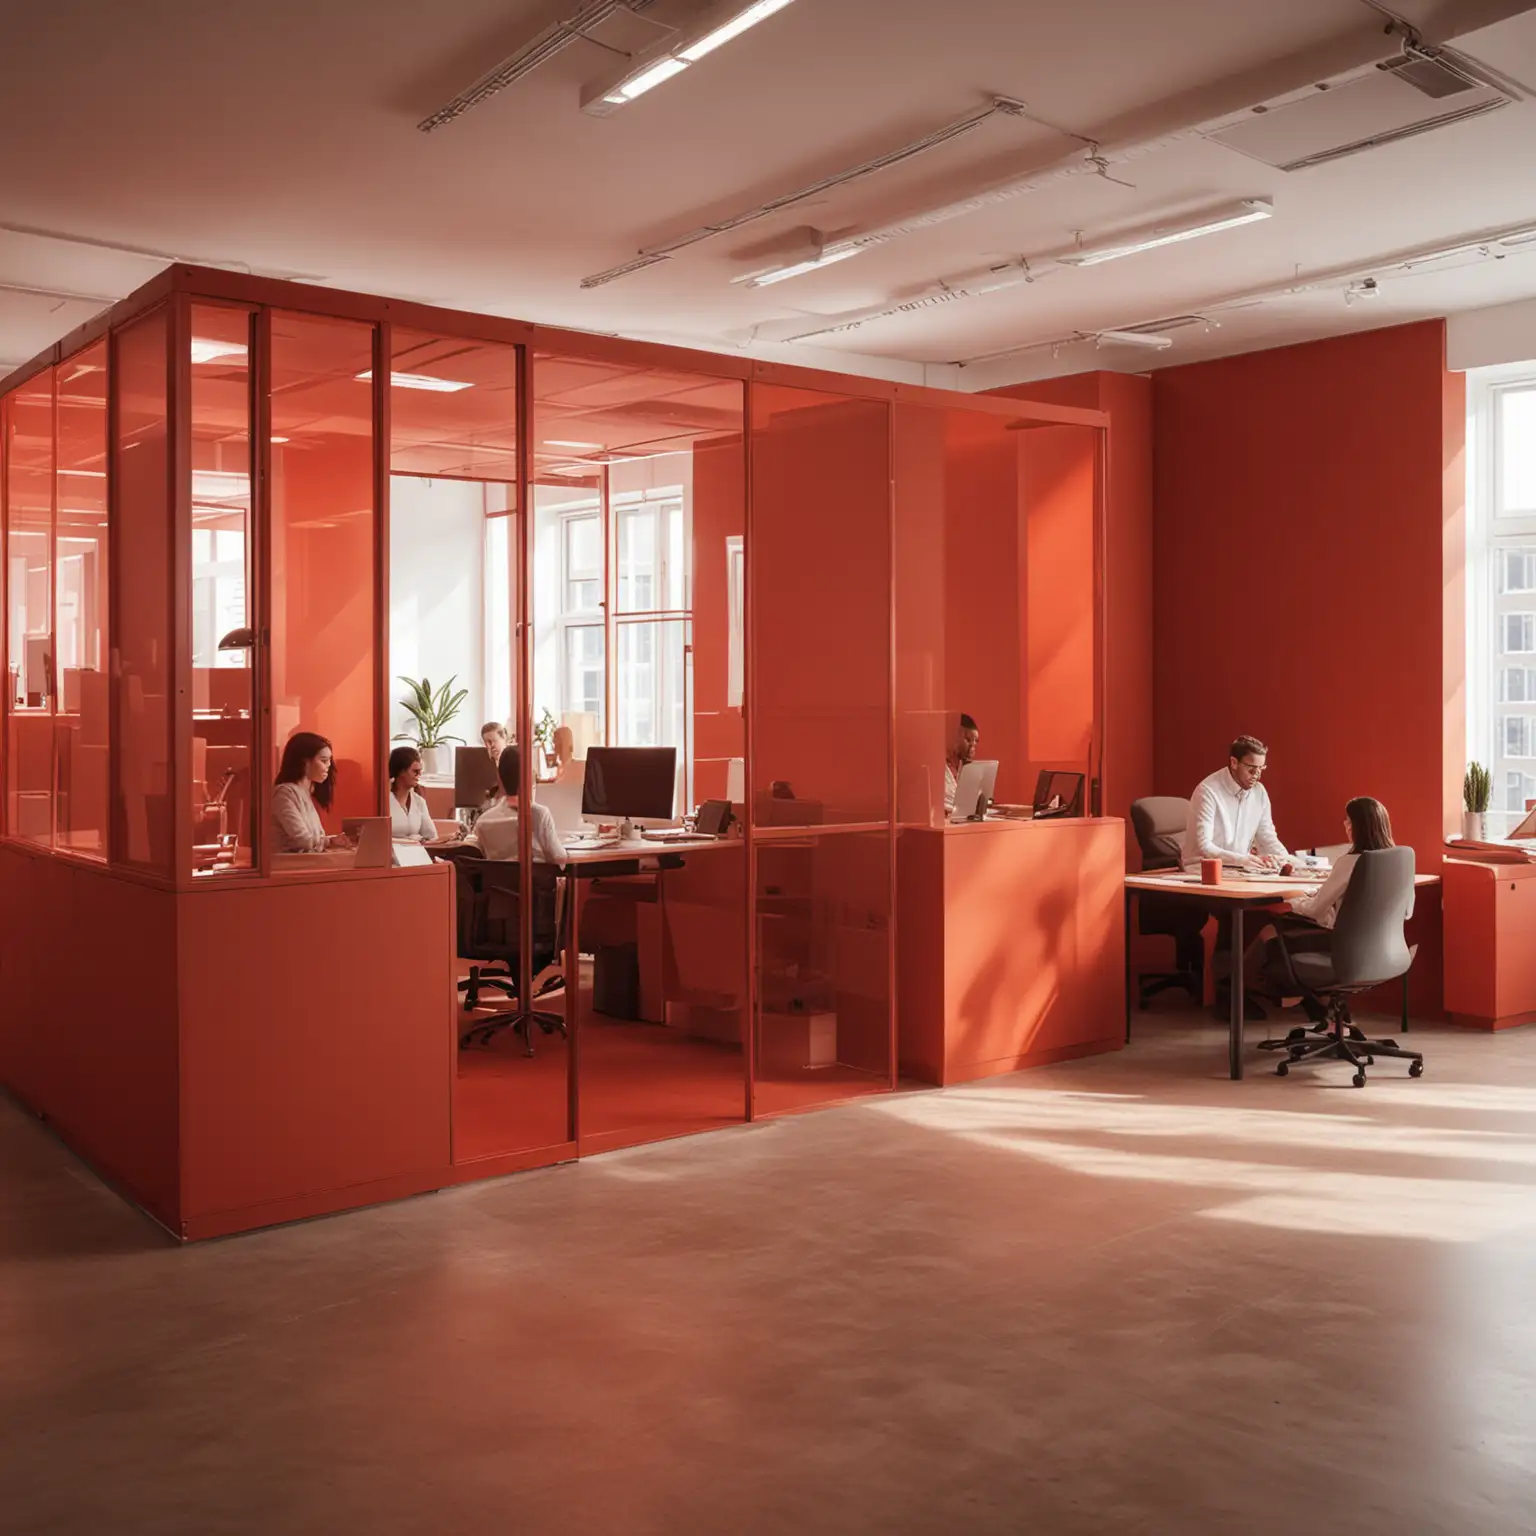 Modular space integrated into a Room System, open office, warm reddish tones, people in the office who are wearing red